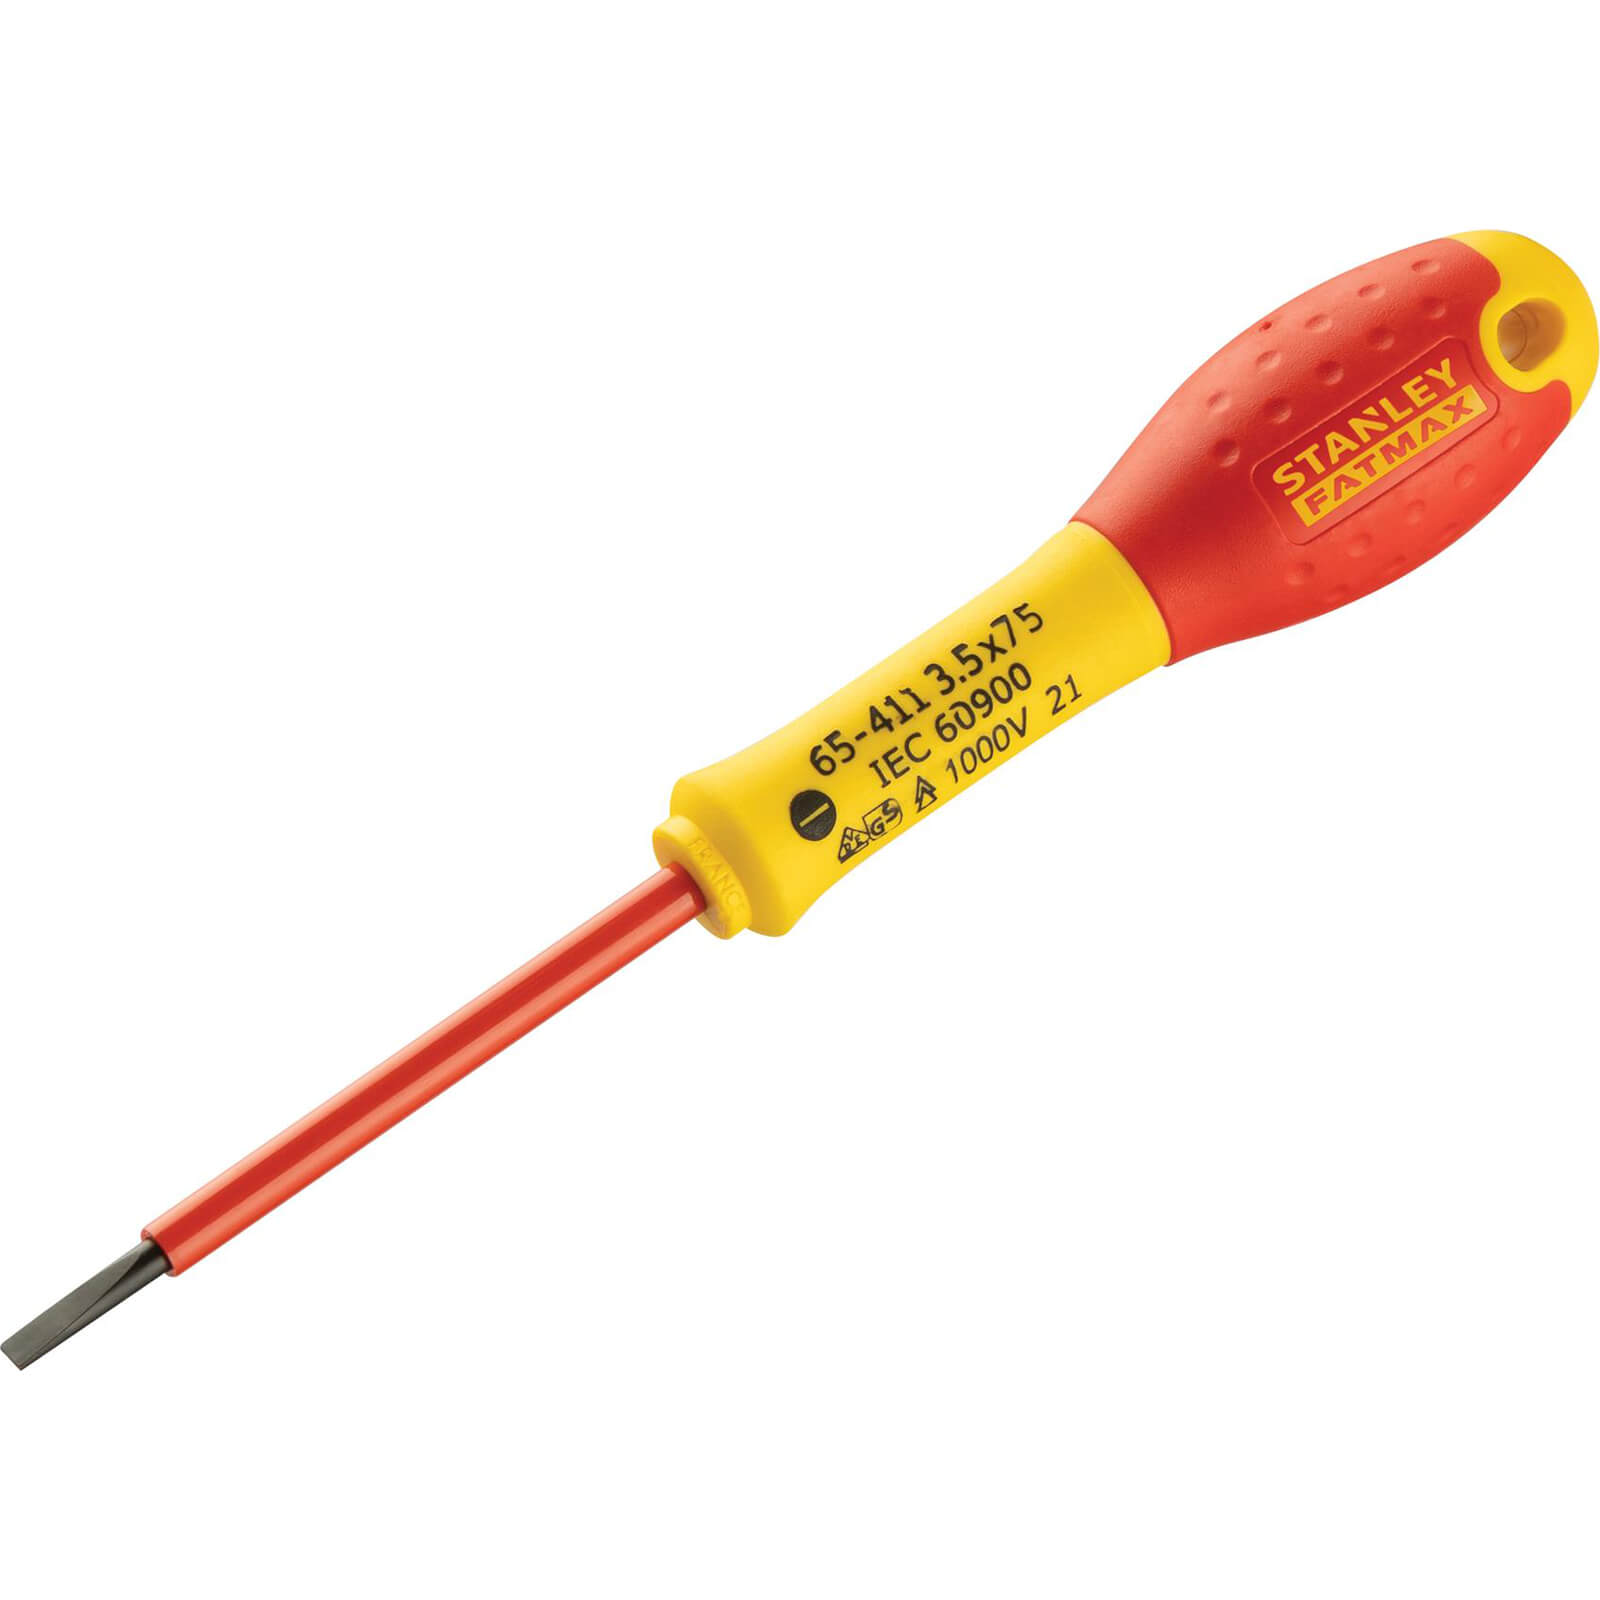 Image of Stanley FatMax Insulated Parallel Slotted Screwdriver 3.5mm 75mm